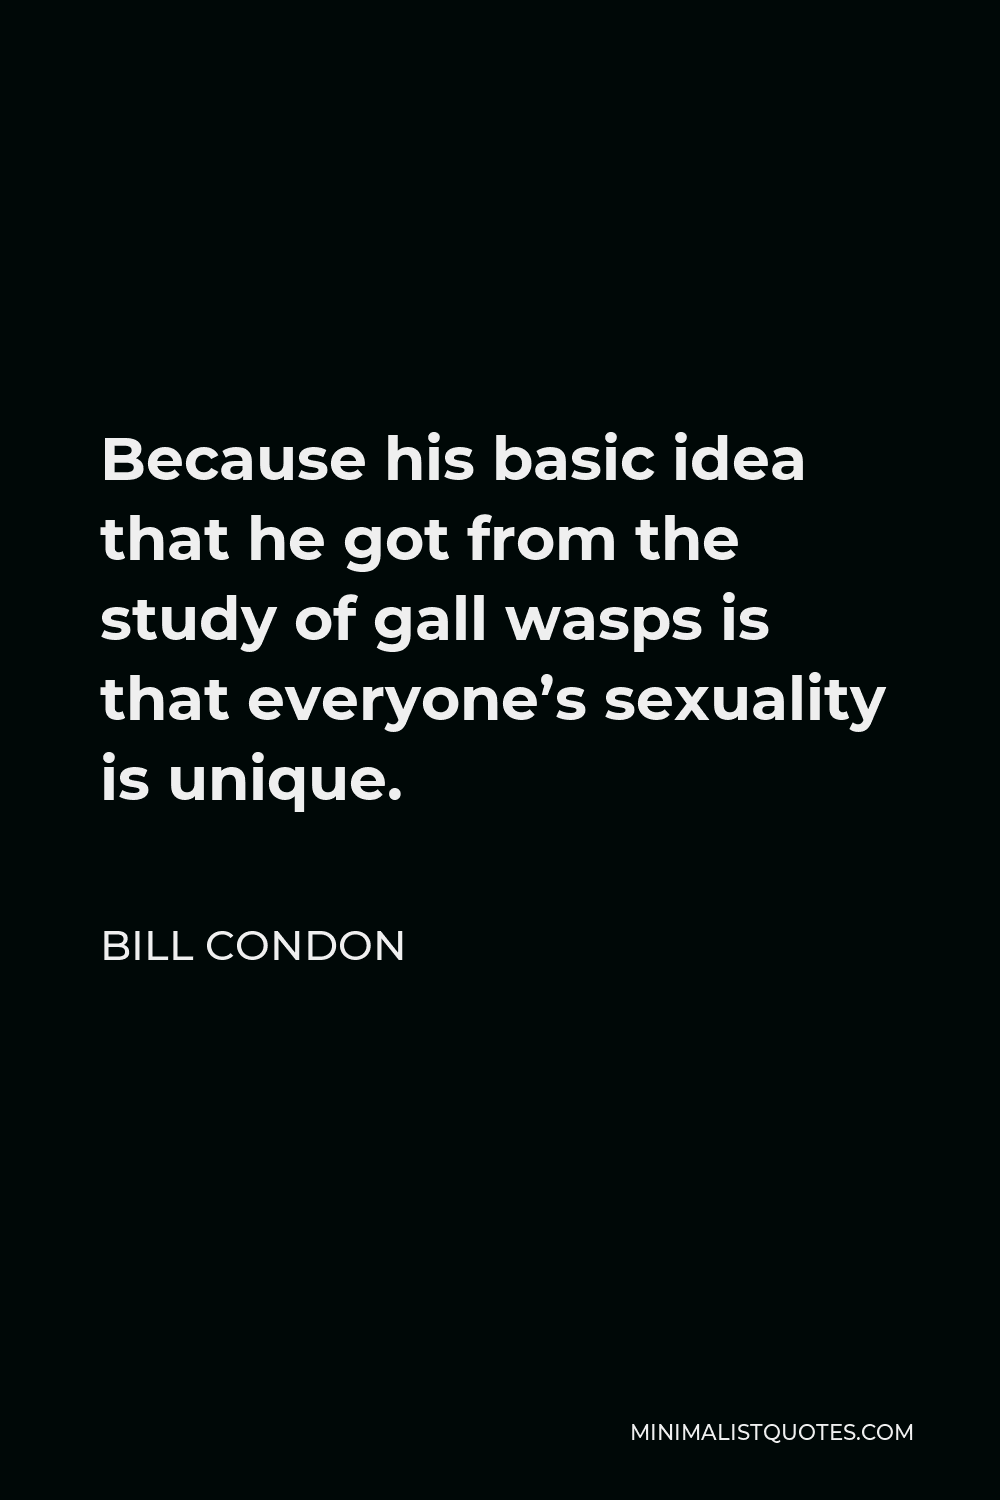 Bill Condon Quote - Because his basic idea that he got from the study of gall wasps is that everyone’s sexuality is unique.